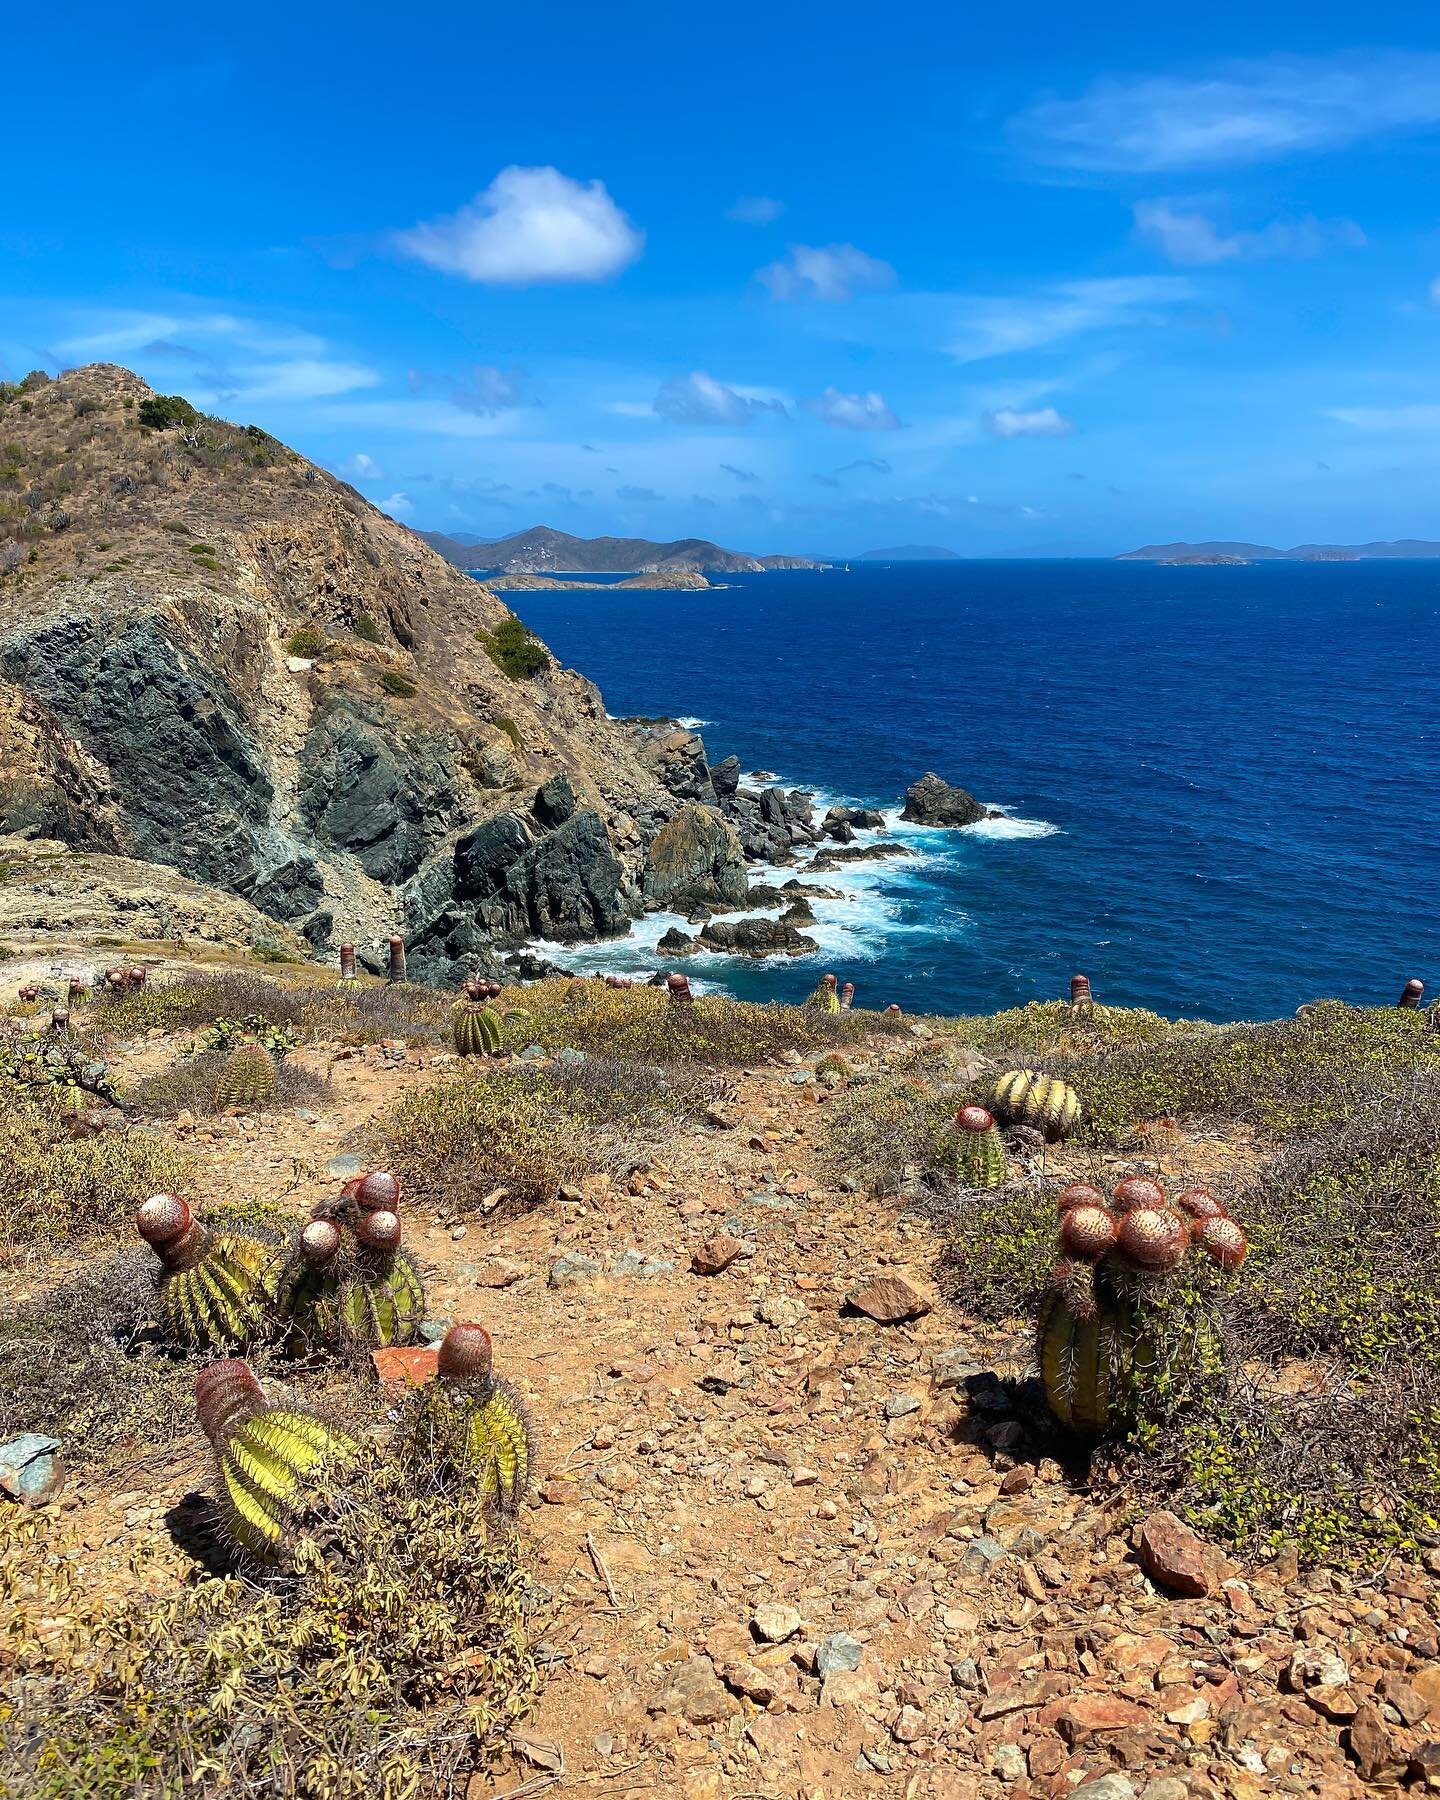 [Ram Head Trail] crossed multiple beaches, an orange salt water pond &amp; STUNNED with views like this from the top. Best trail in Virgin Islands National Park? There&rsquo;s no question. #definefettletravels